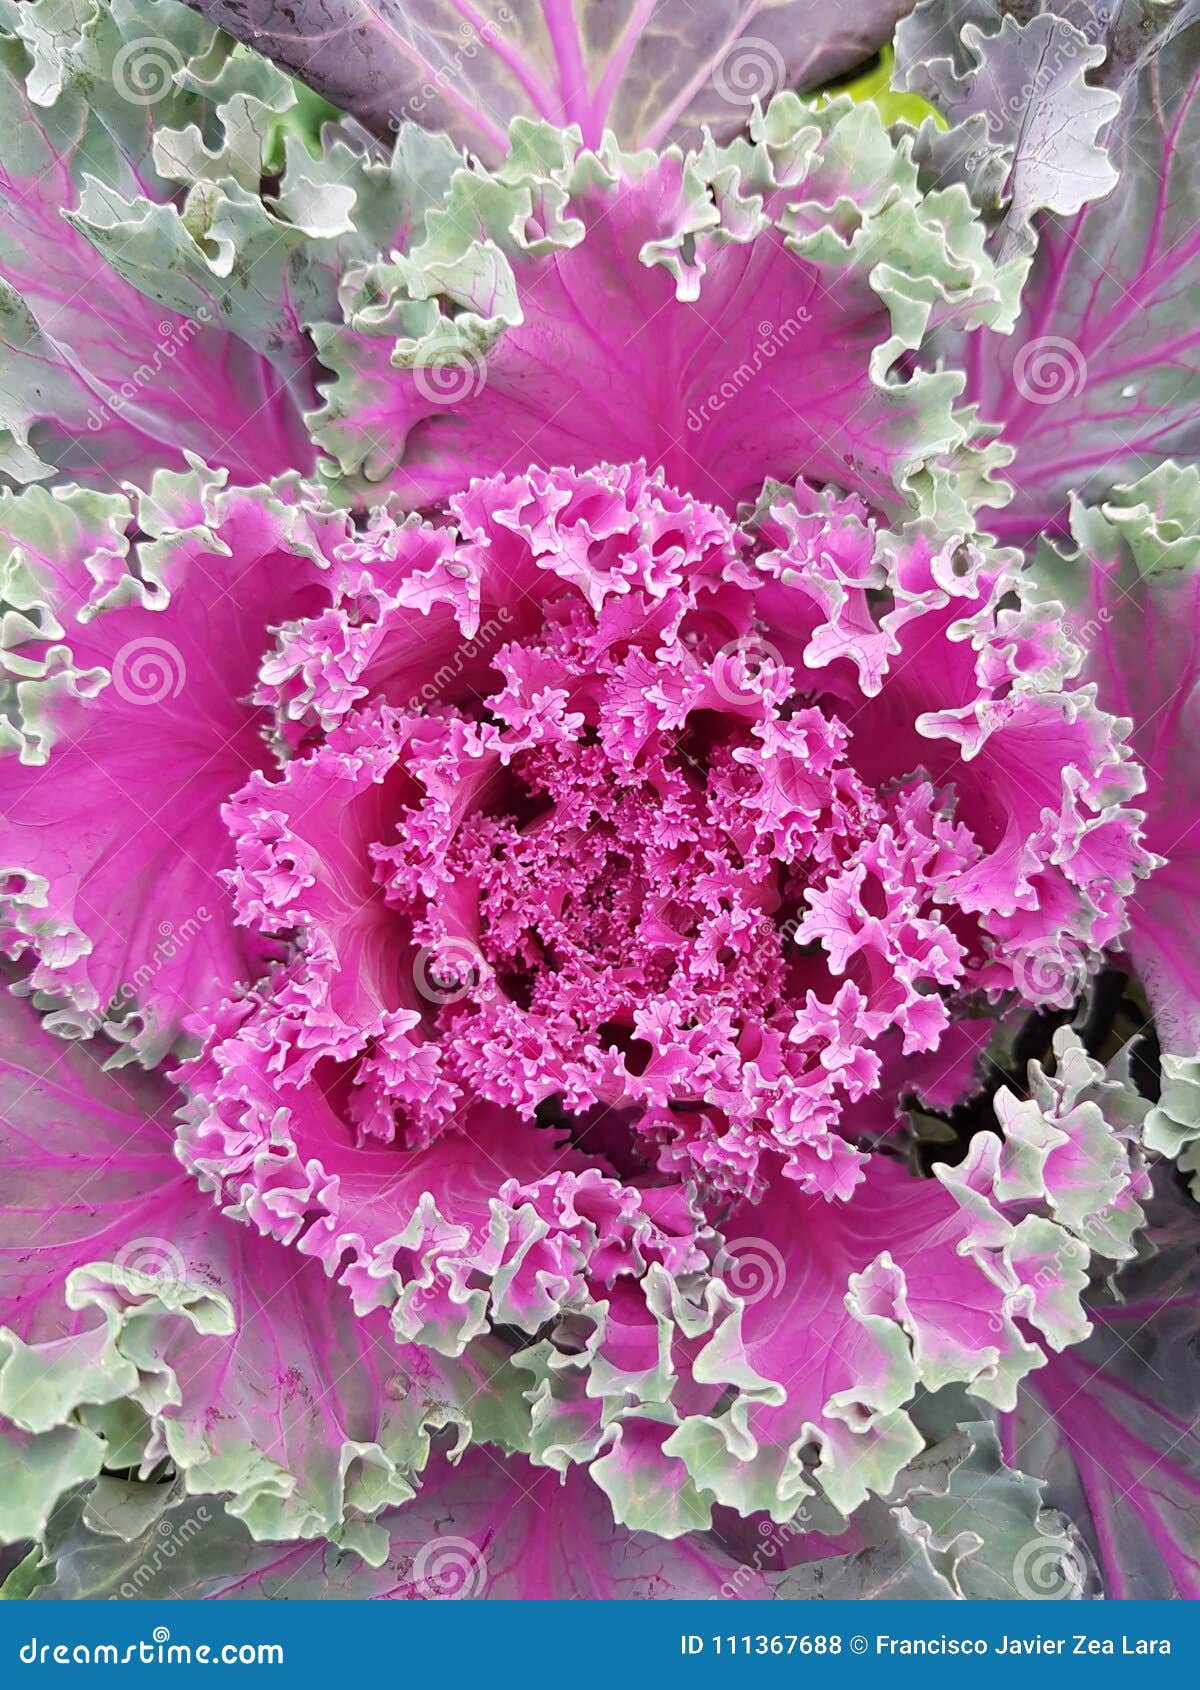 brassica oleracea, decorative plant in green with purple, plant similar to a head of lettuce